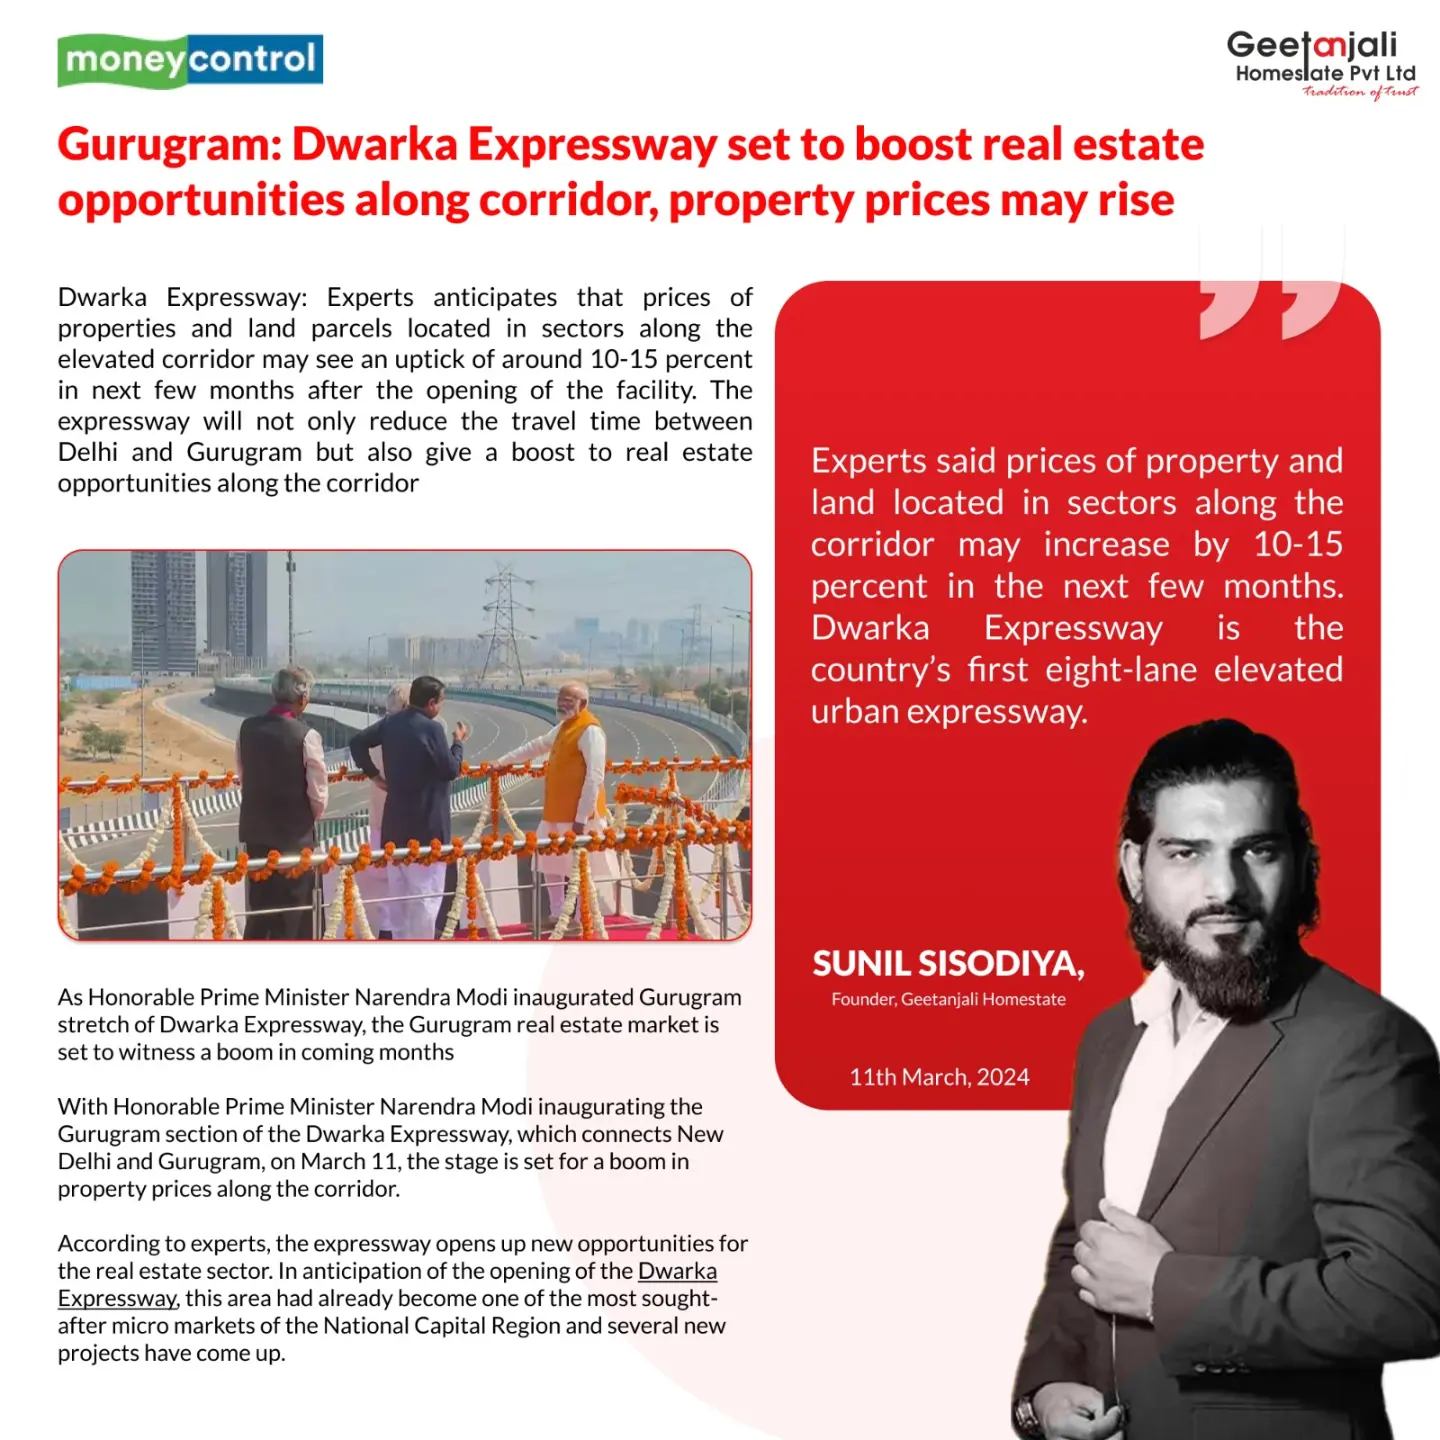 Gurugram: Dwarka Expressway set to boost real estate opportunities along corridor, property prices may rise